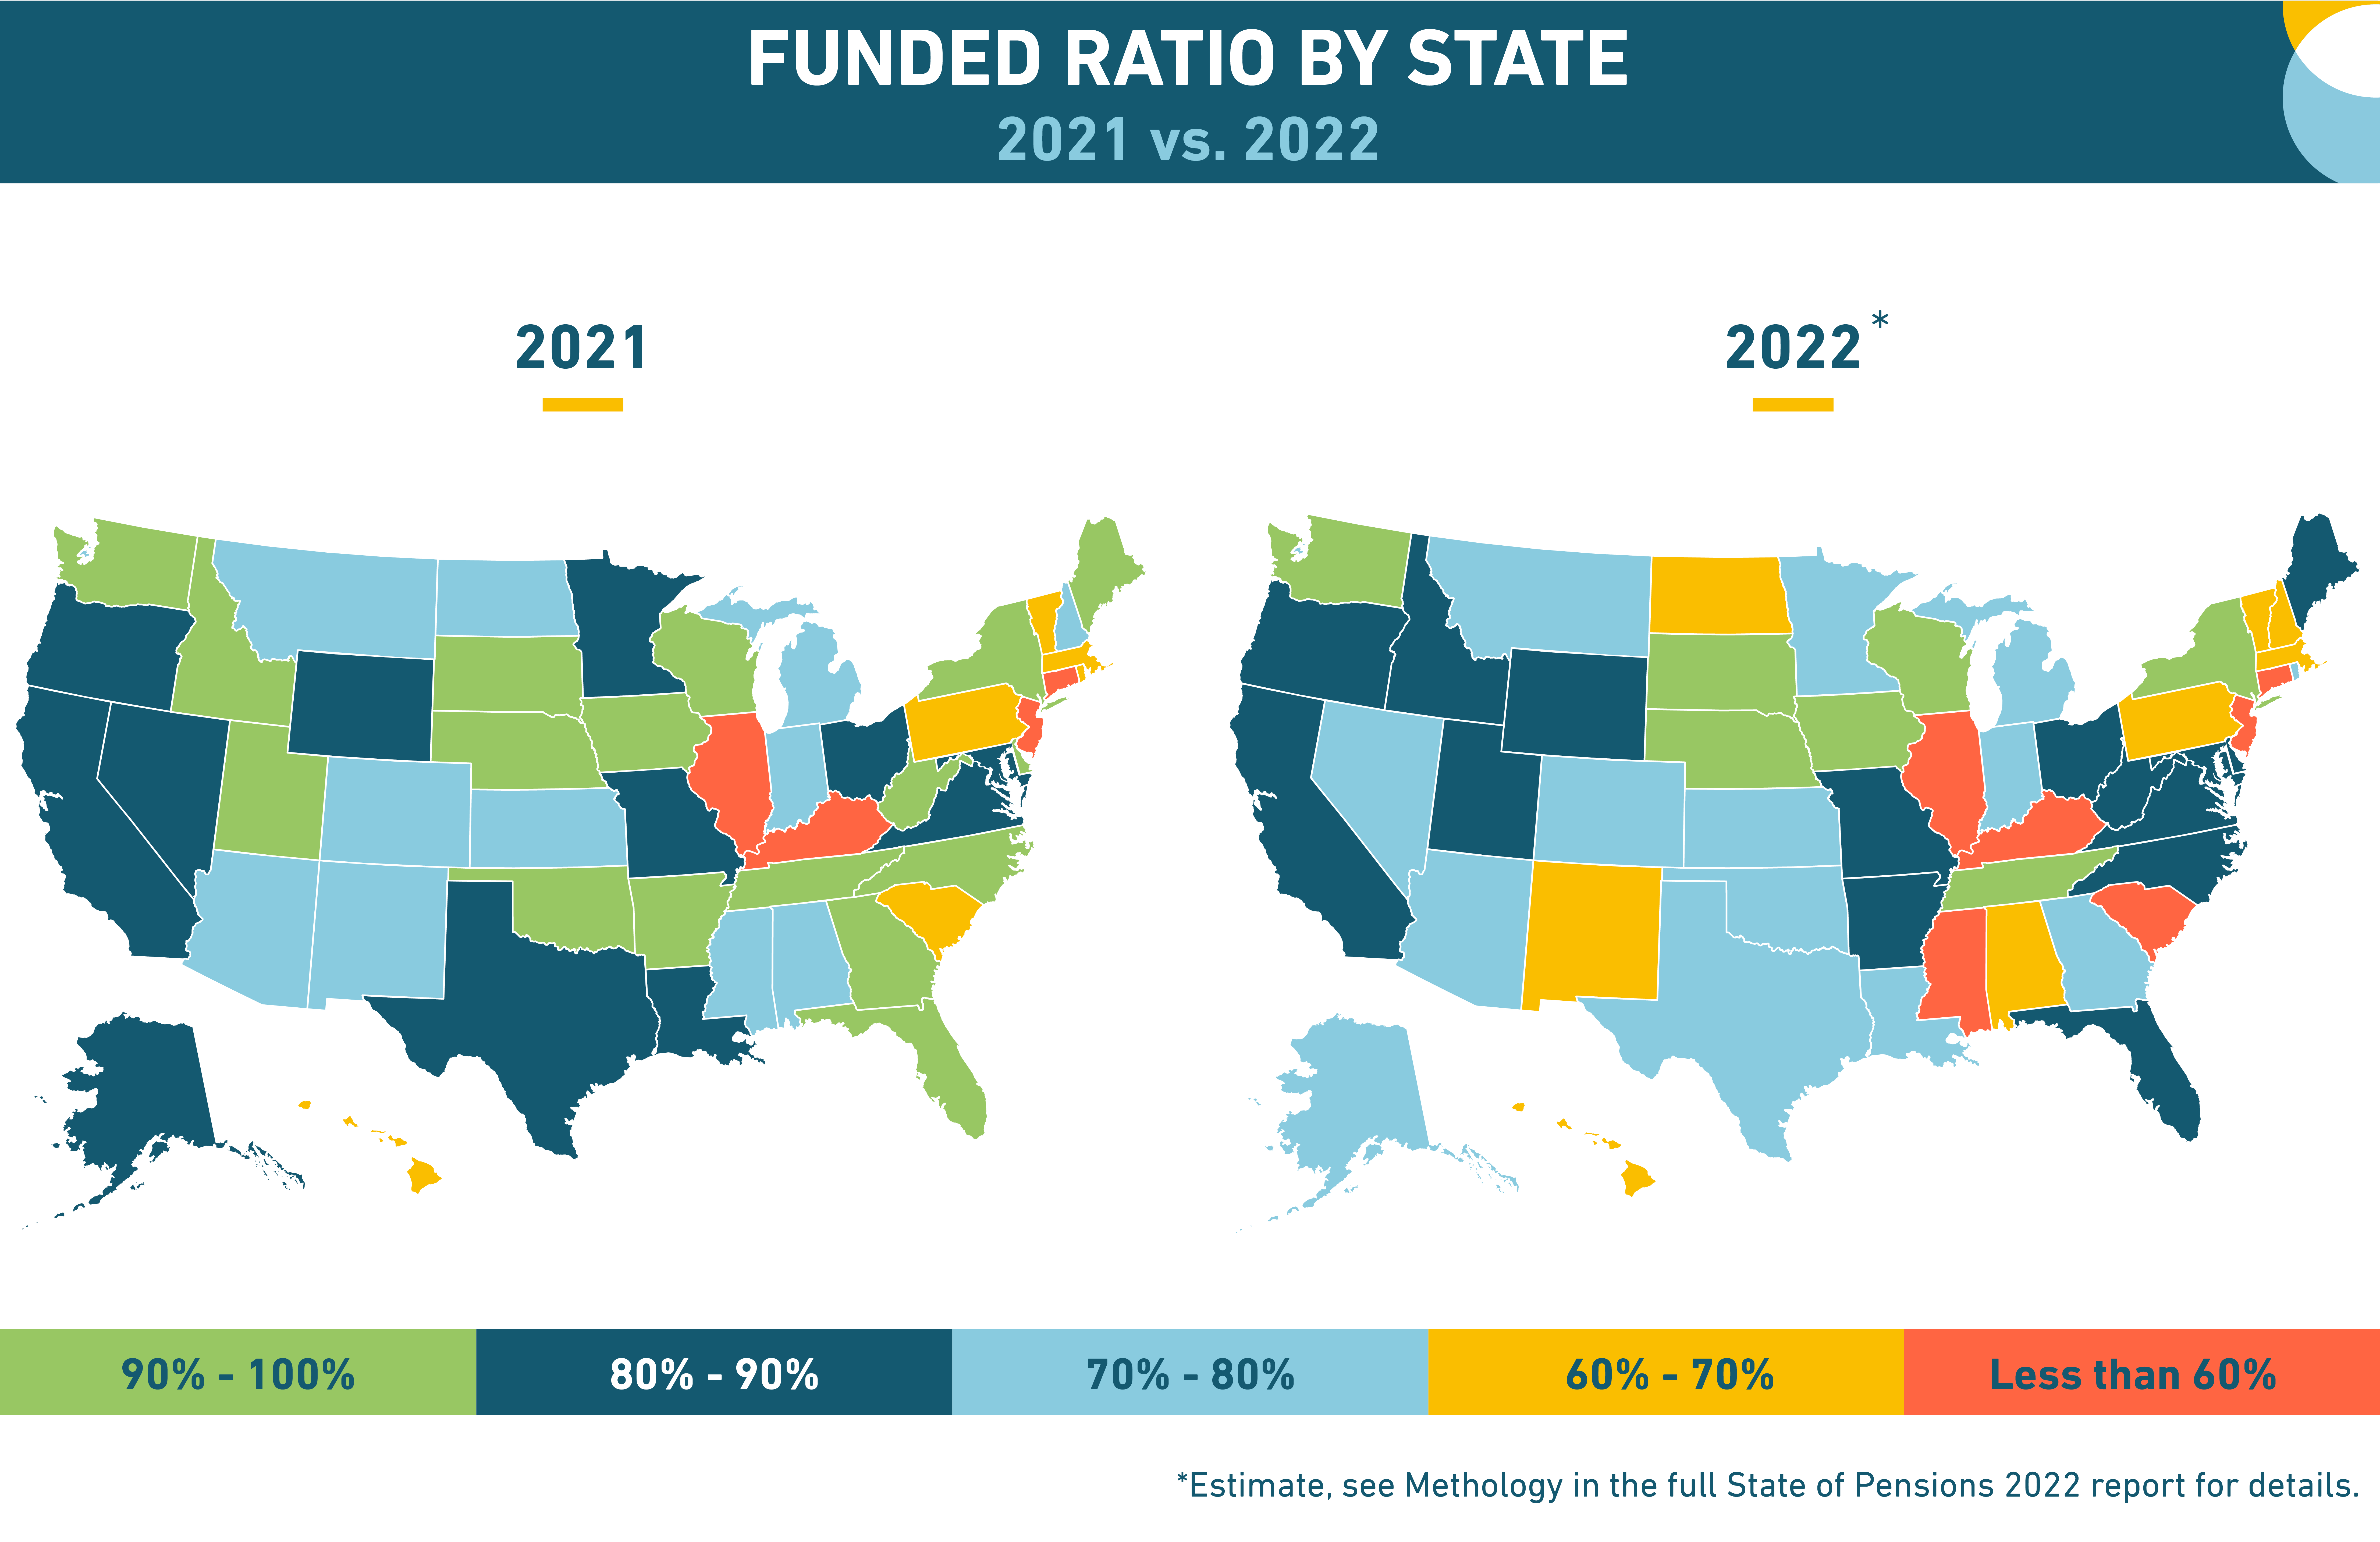 US Maps Showing Public Pension Funded Ratio by State for 2021 and 2022